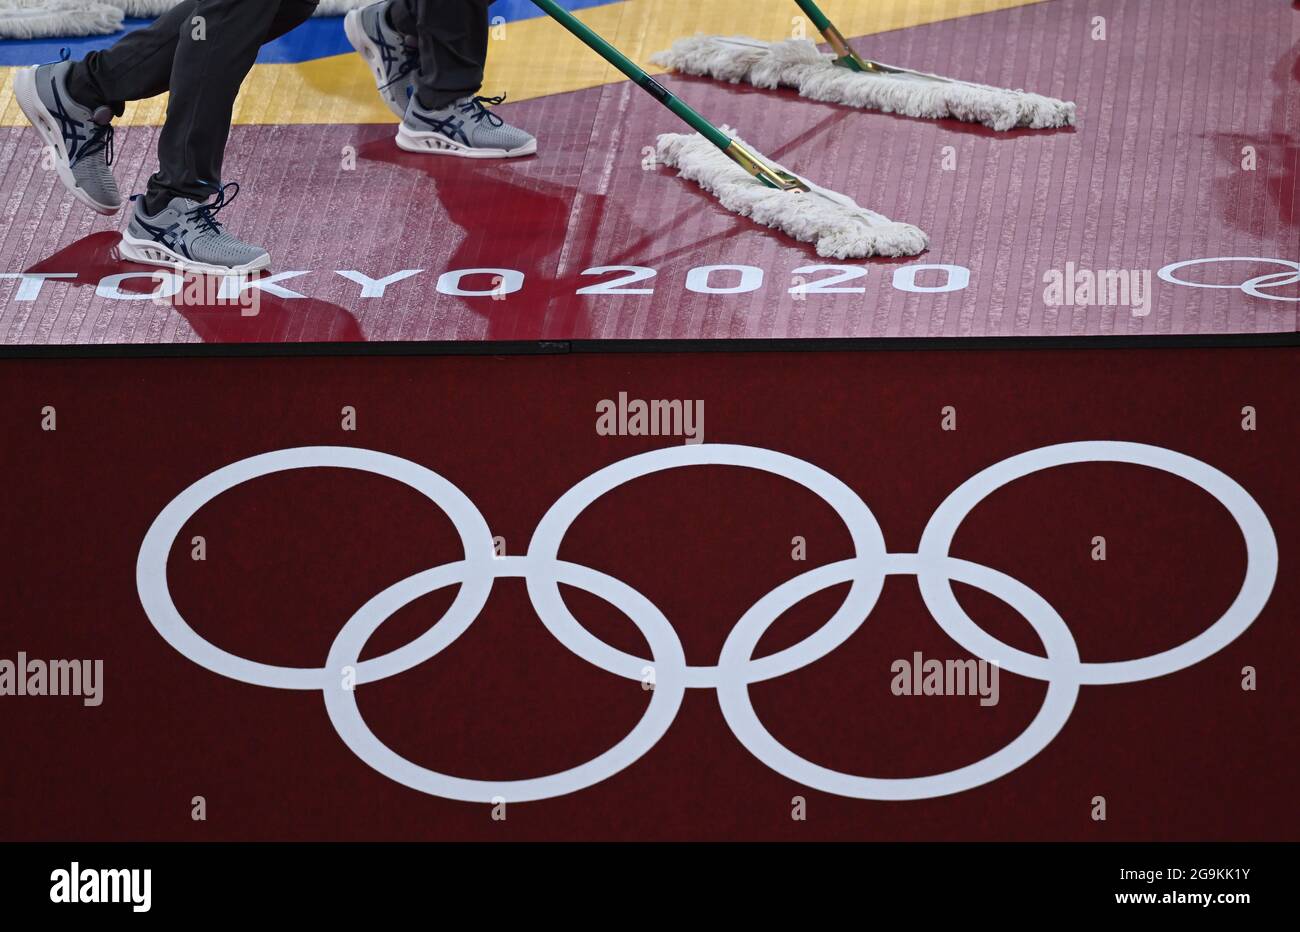 Chiba, Japan. 27th July, 2021. Taekwondo: Olympics, preliminaries, quarterfinals, men  80 Kg, at Makuhari Messe Hall. Helpers clean the ring with the lettering 'Tokyo 2020'. Credit: Swen Pförtner/dpa/Alamy Live News Stock Photo